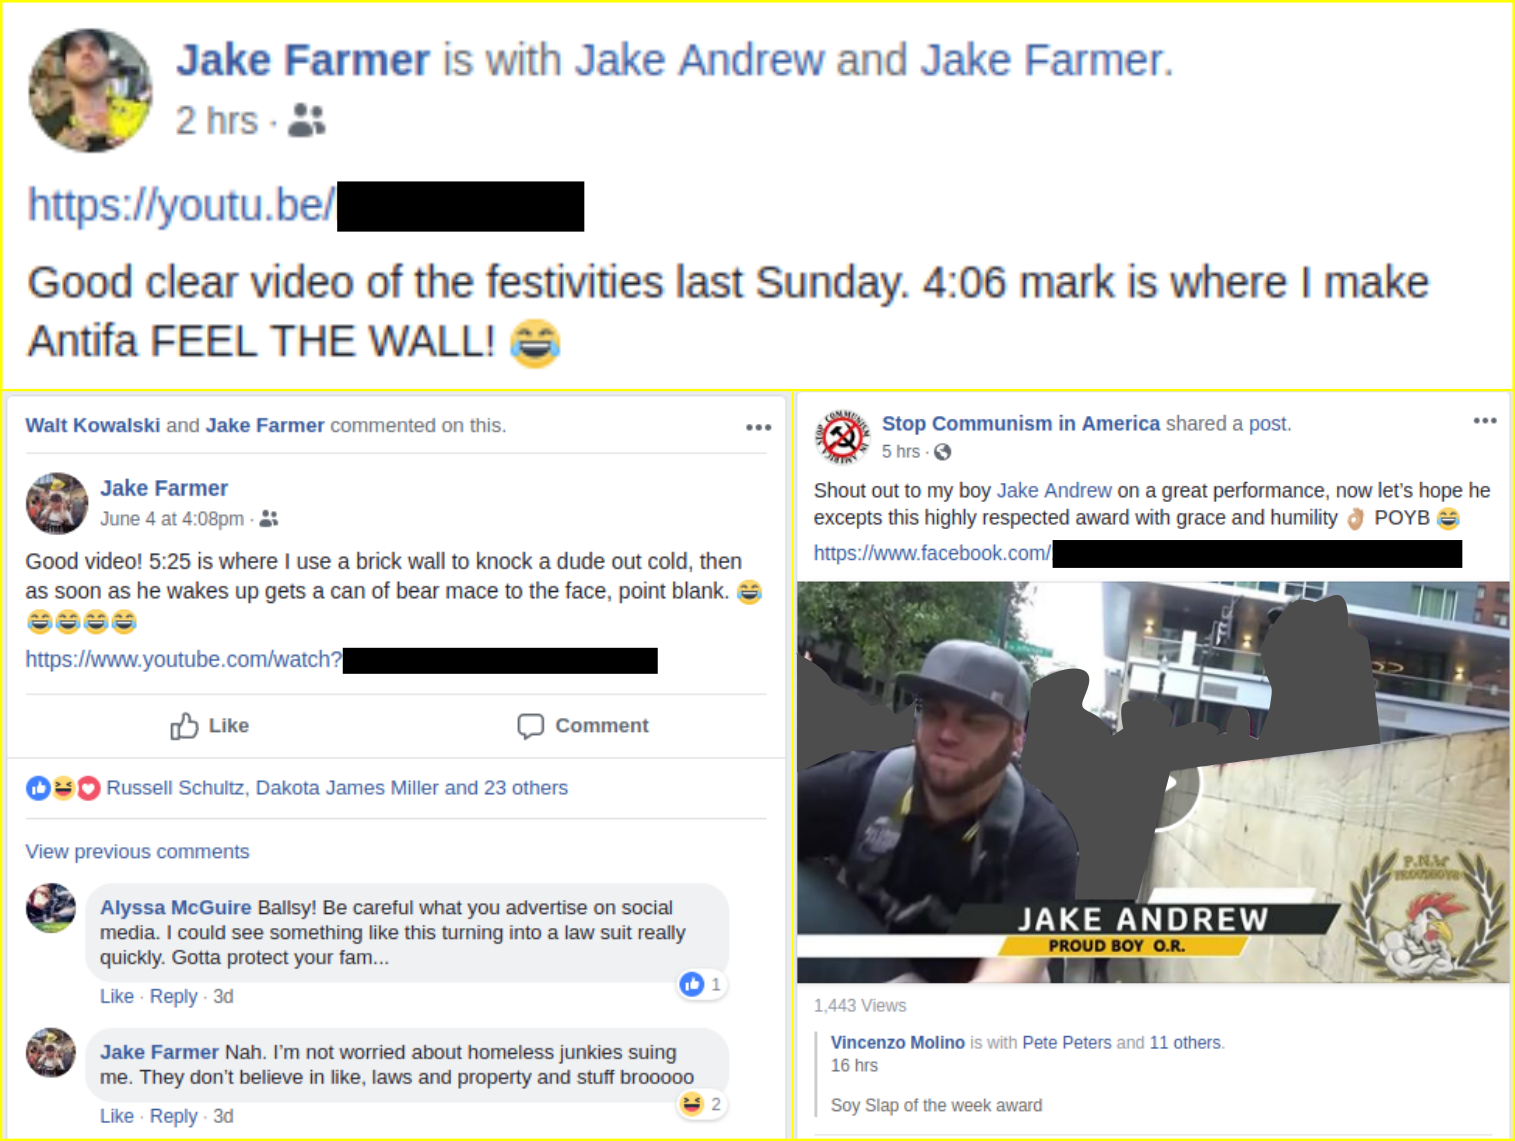 Jake Farmer boasts online about assaulting activists